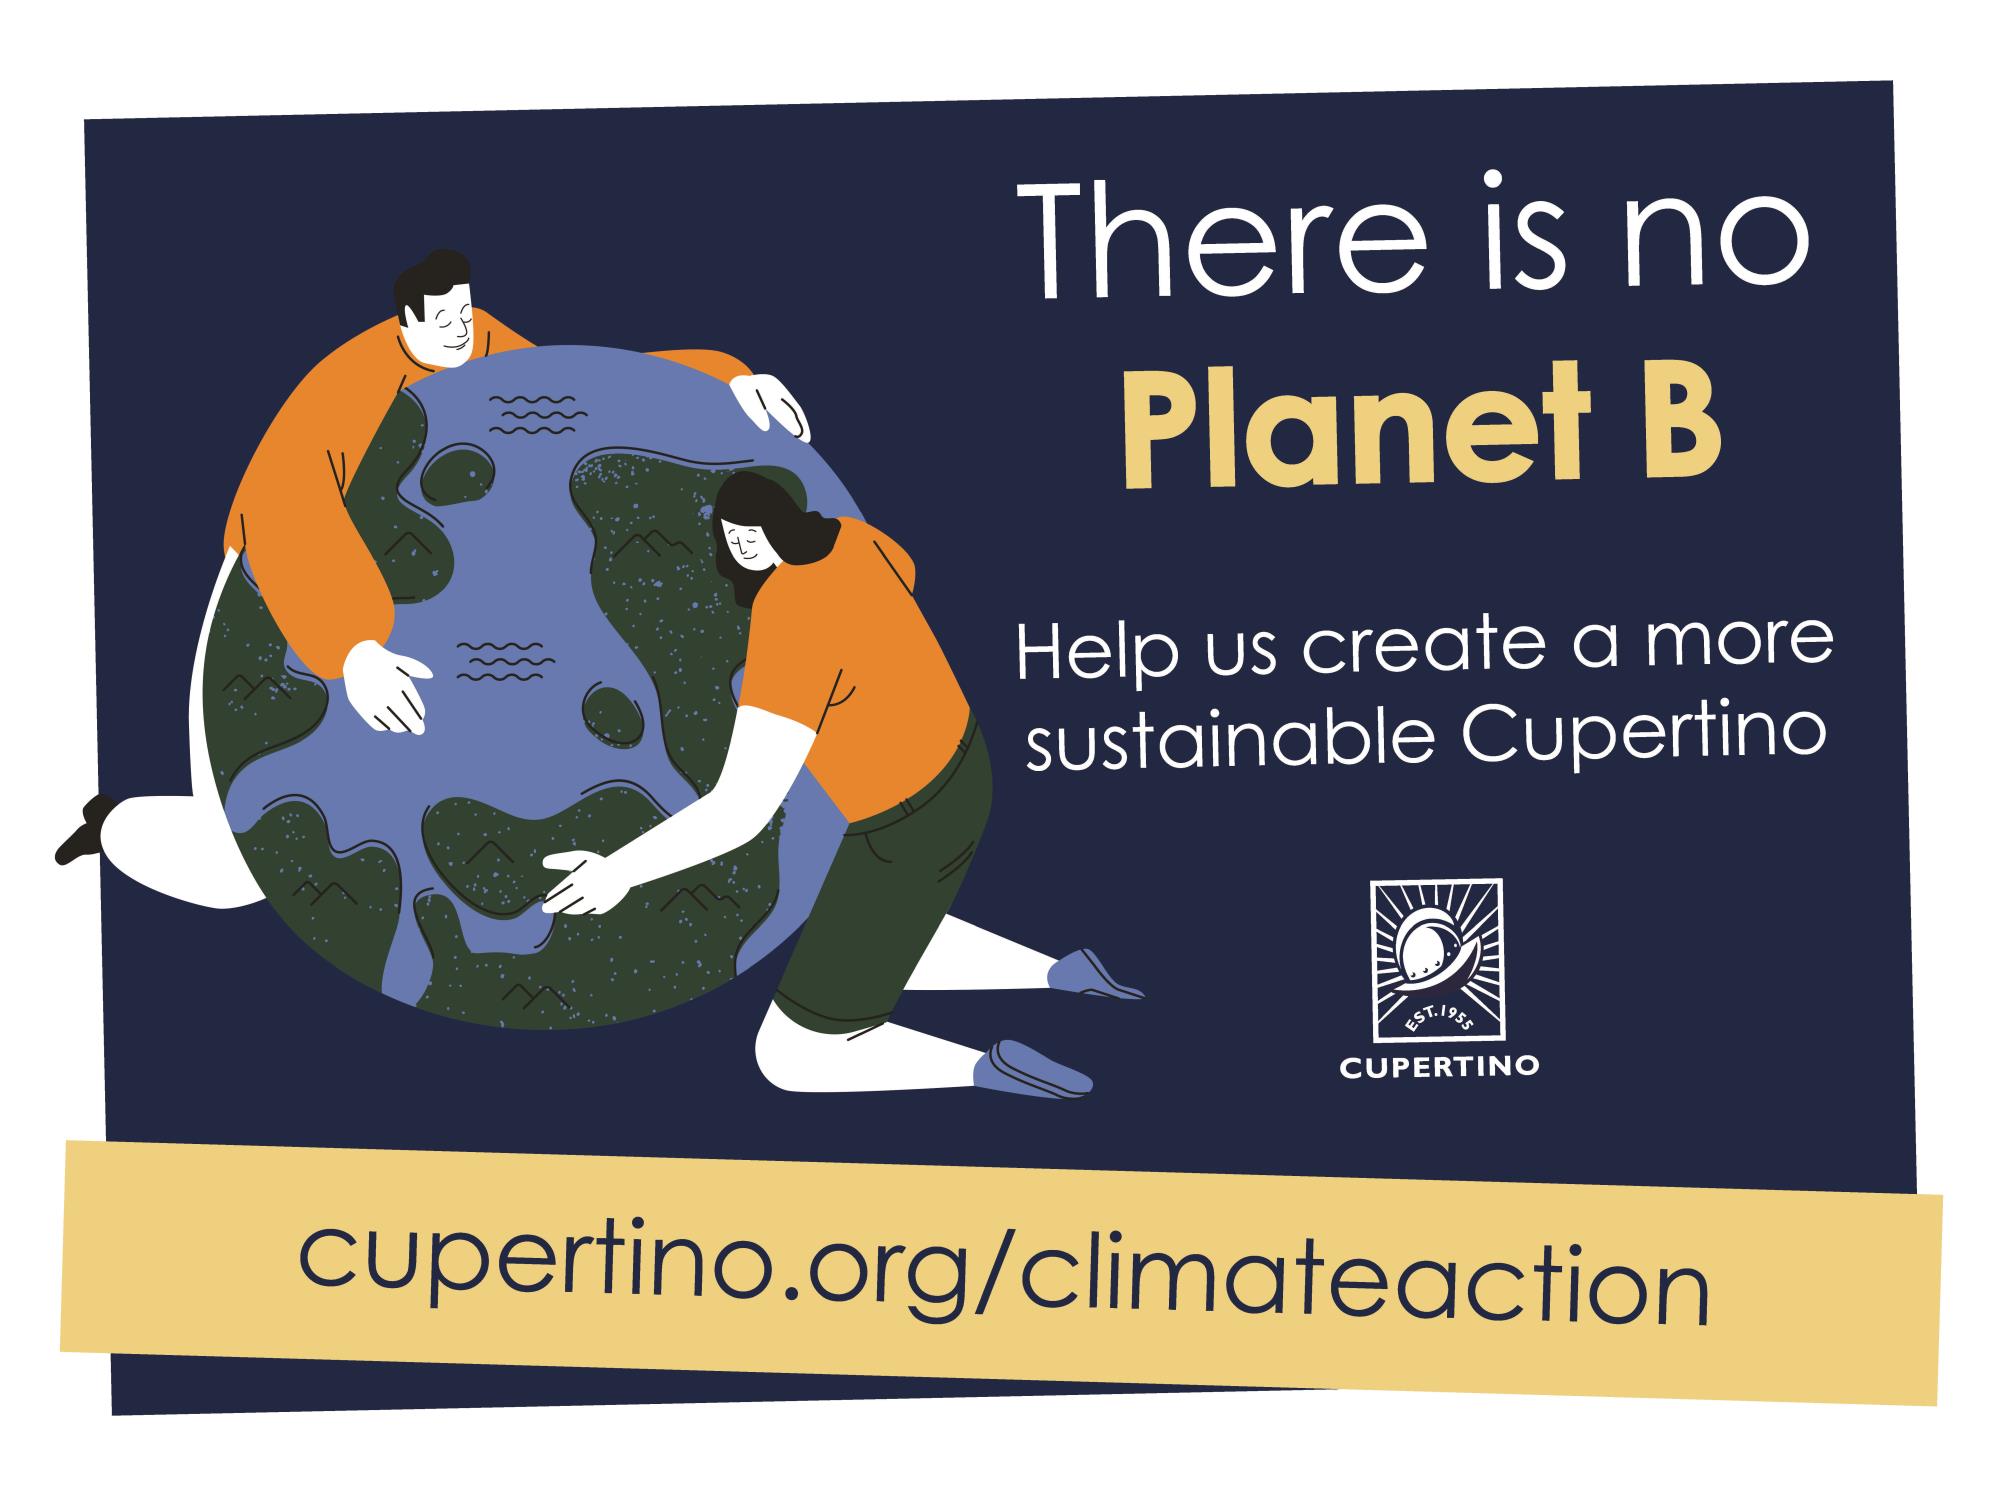 There is no Planet B - Help us create a more sustainable Cupertino